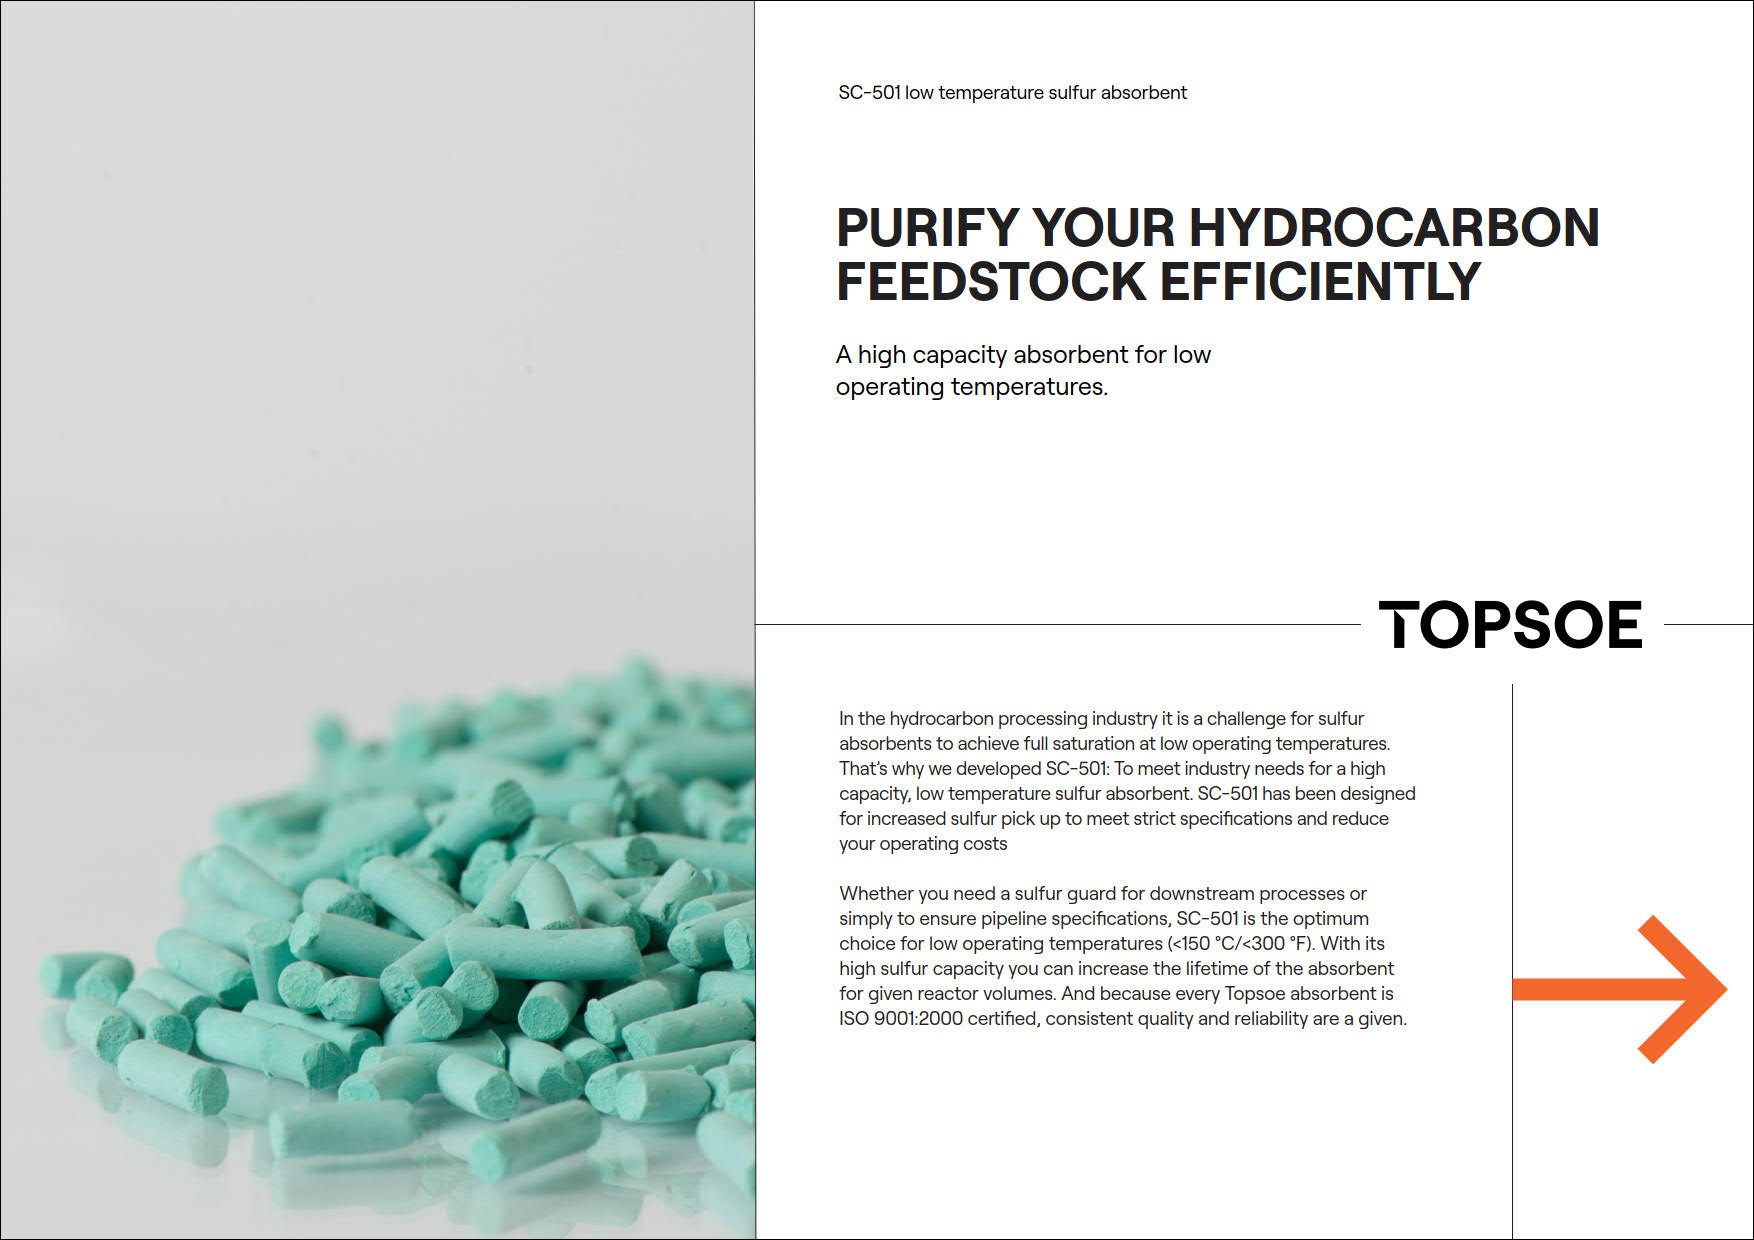 Purify your hydrocarbon feedstock efficiently